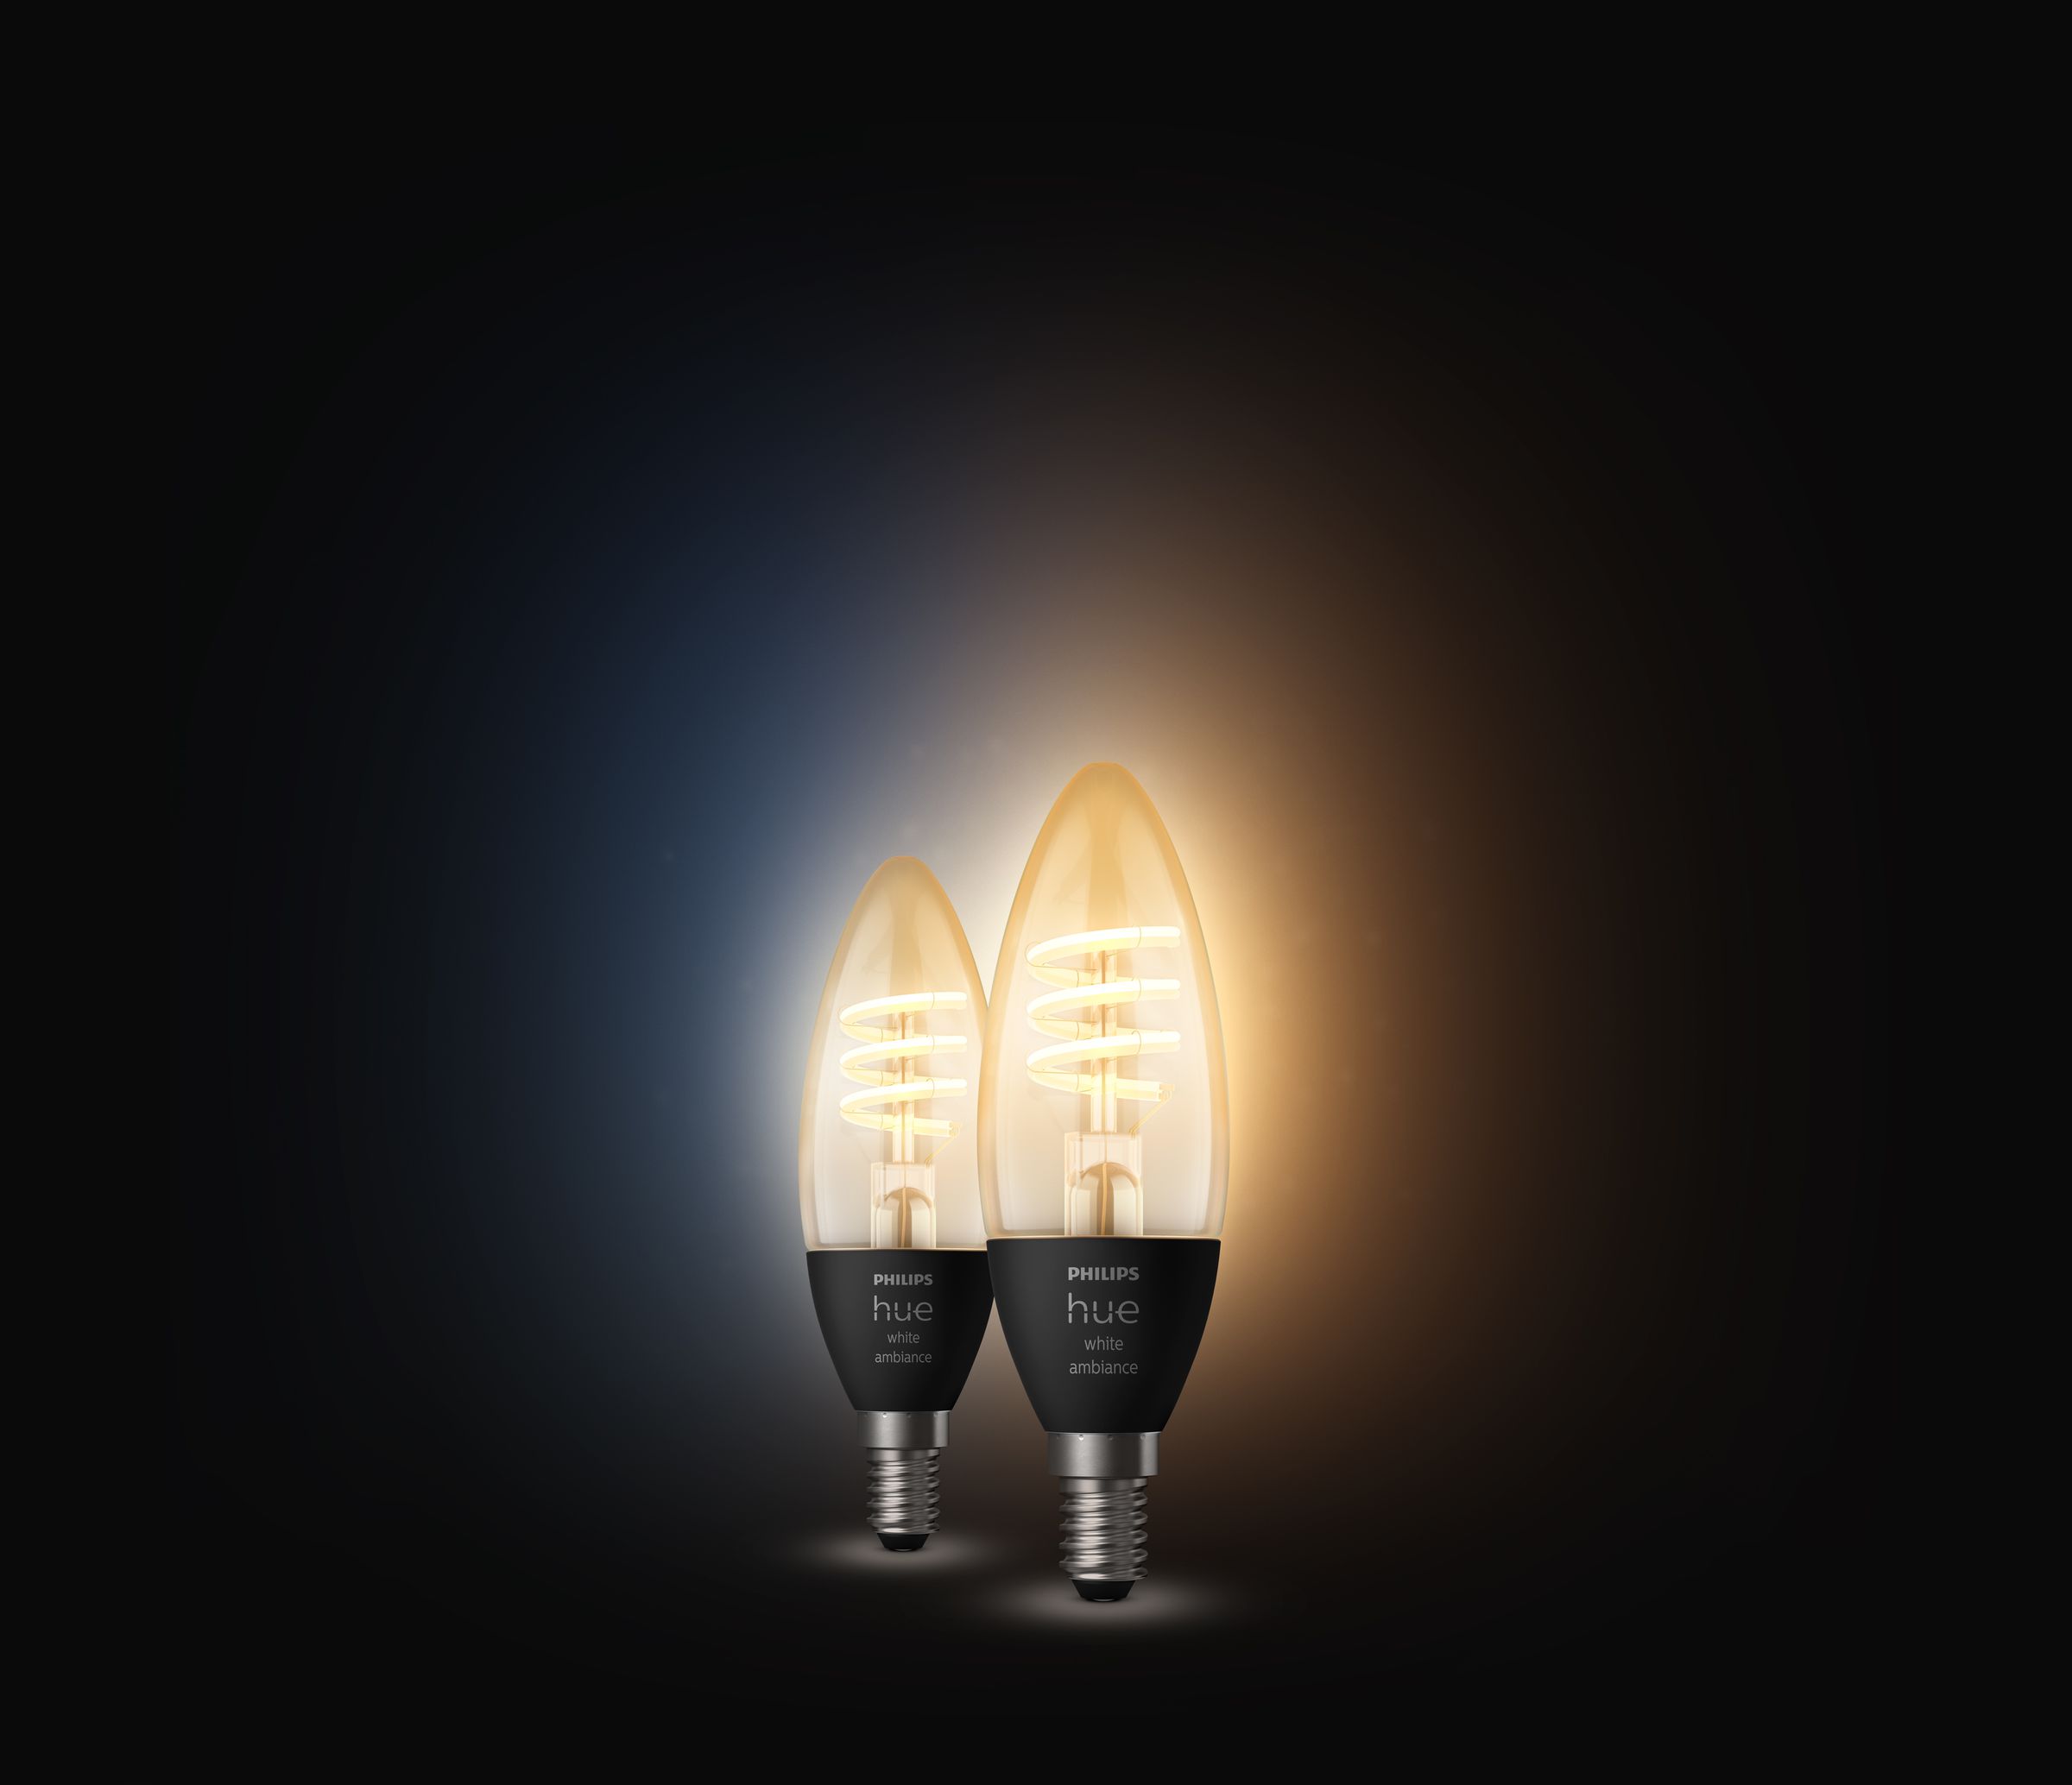 An updated version of the Hue filament candle bulb (for an e14 or e12 screw fitting) adds tunable white light.